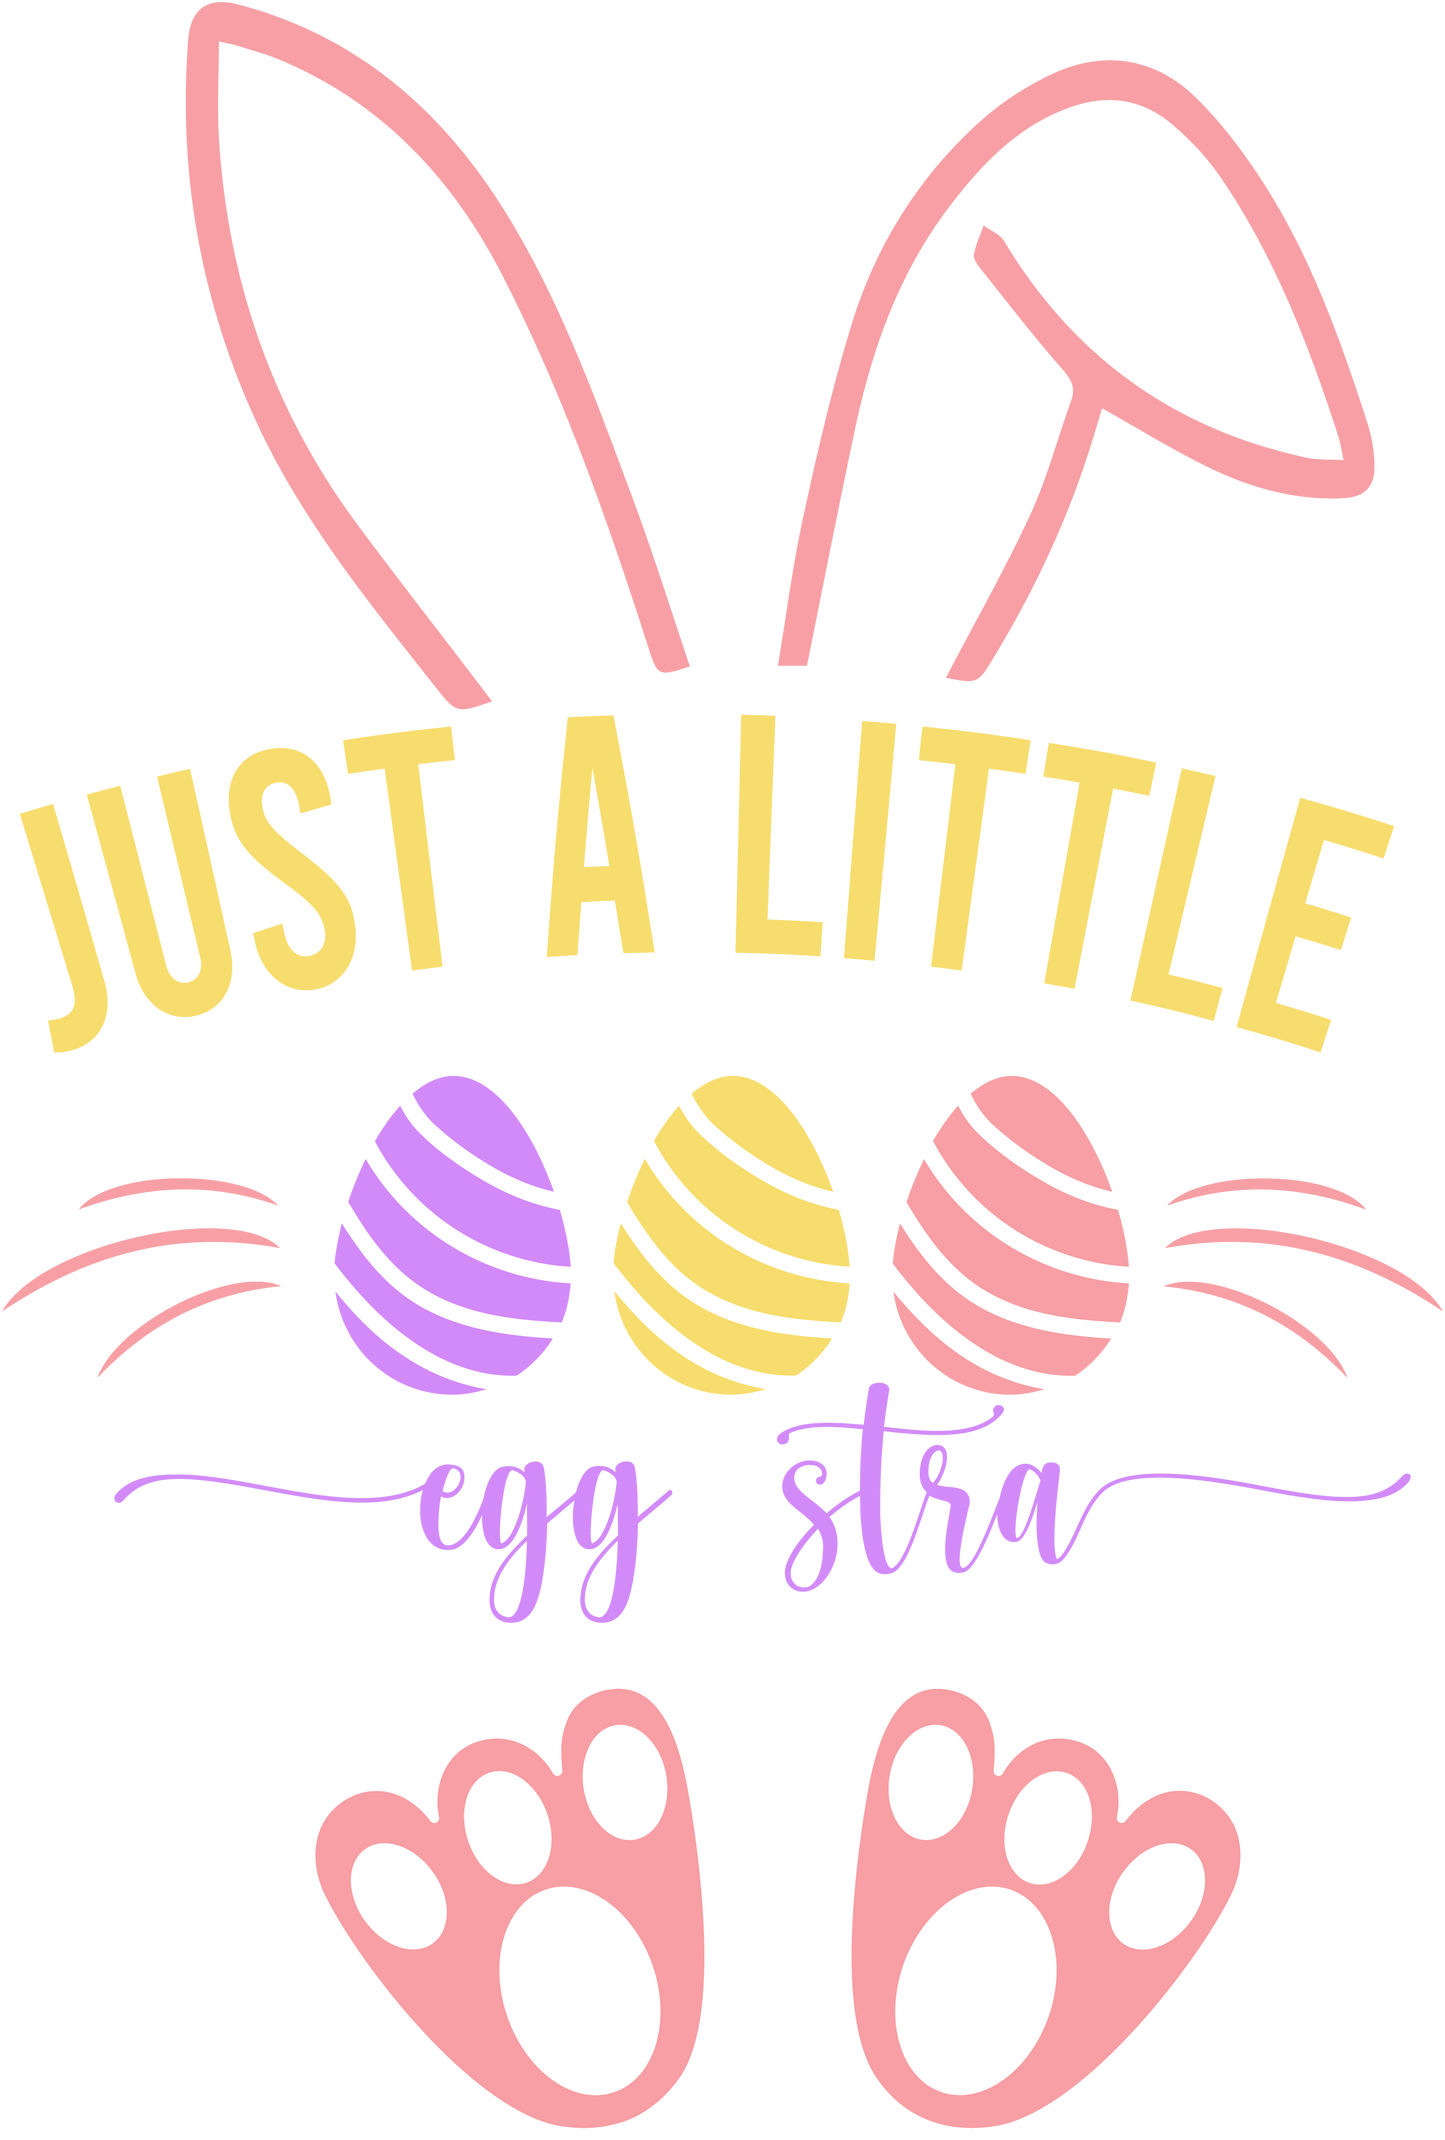 JUST A LITTLE EGG STRA